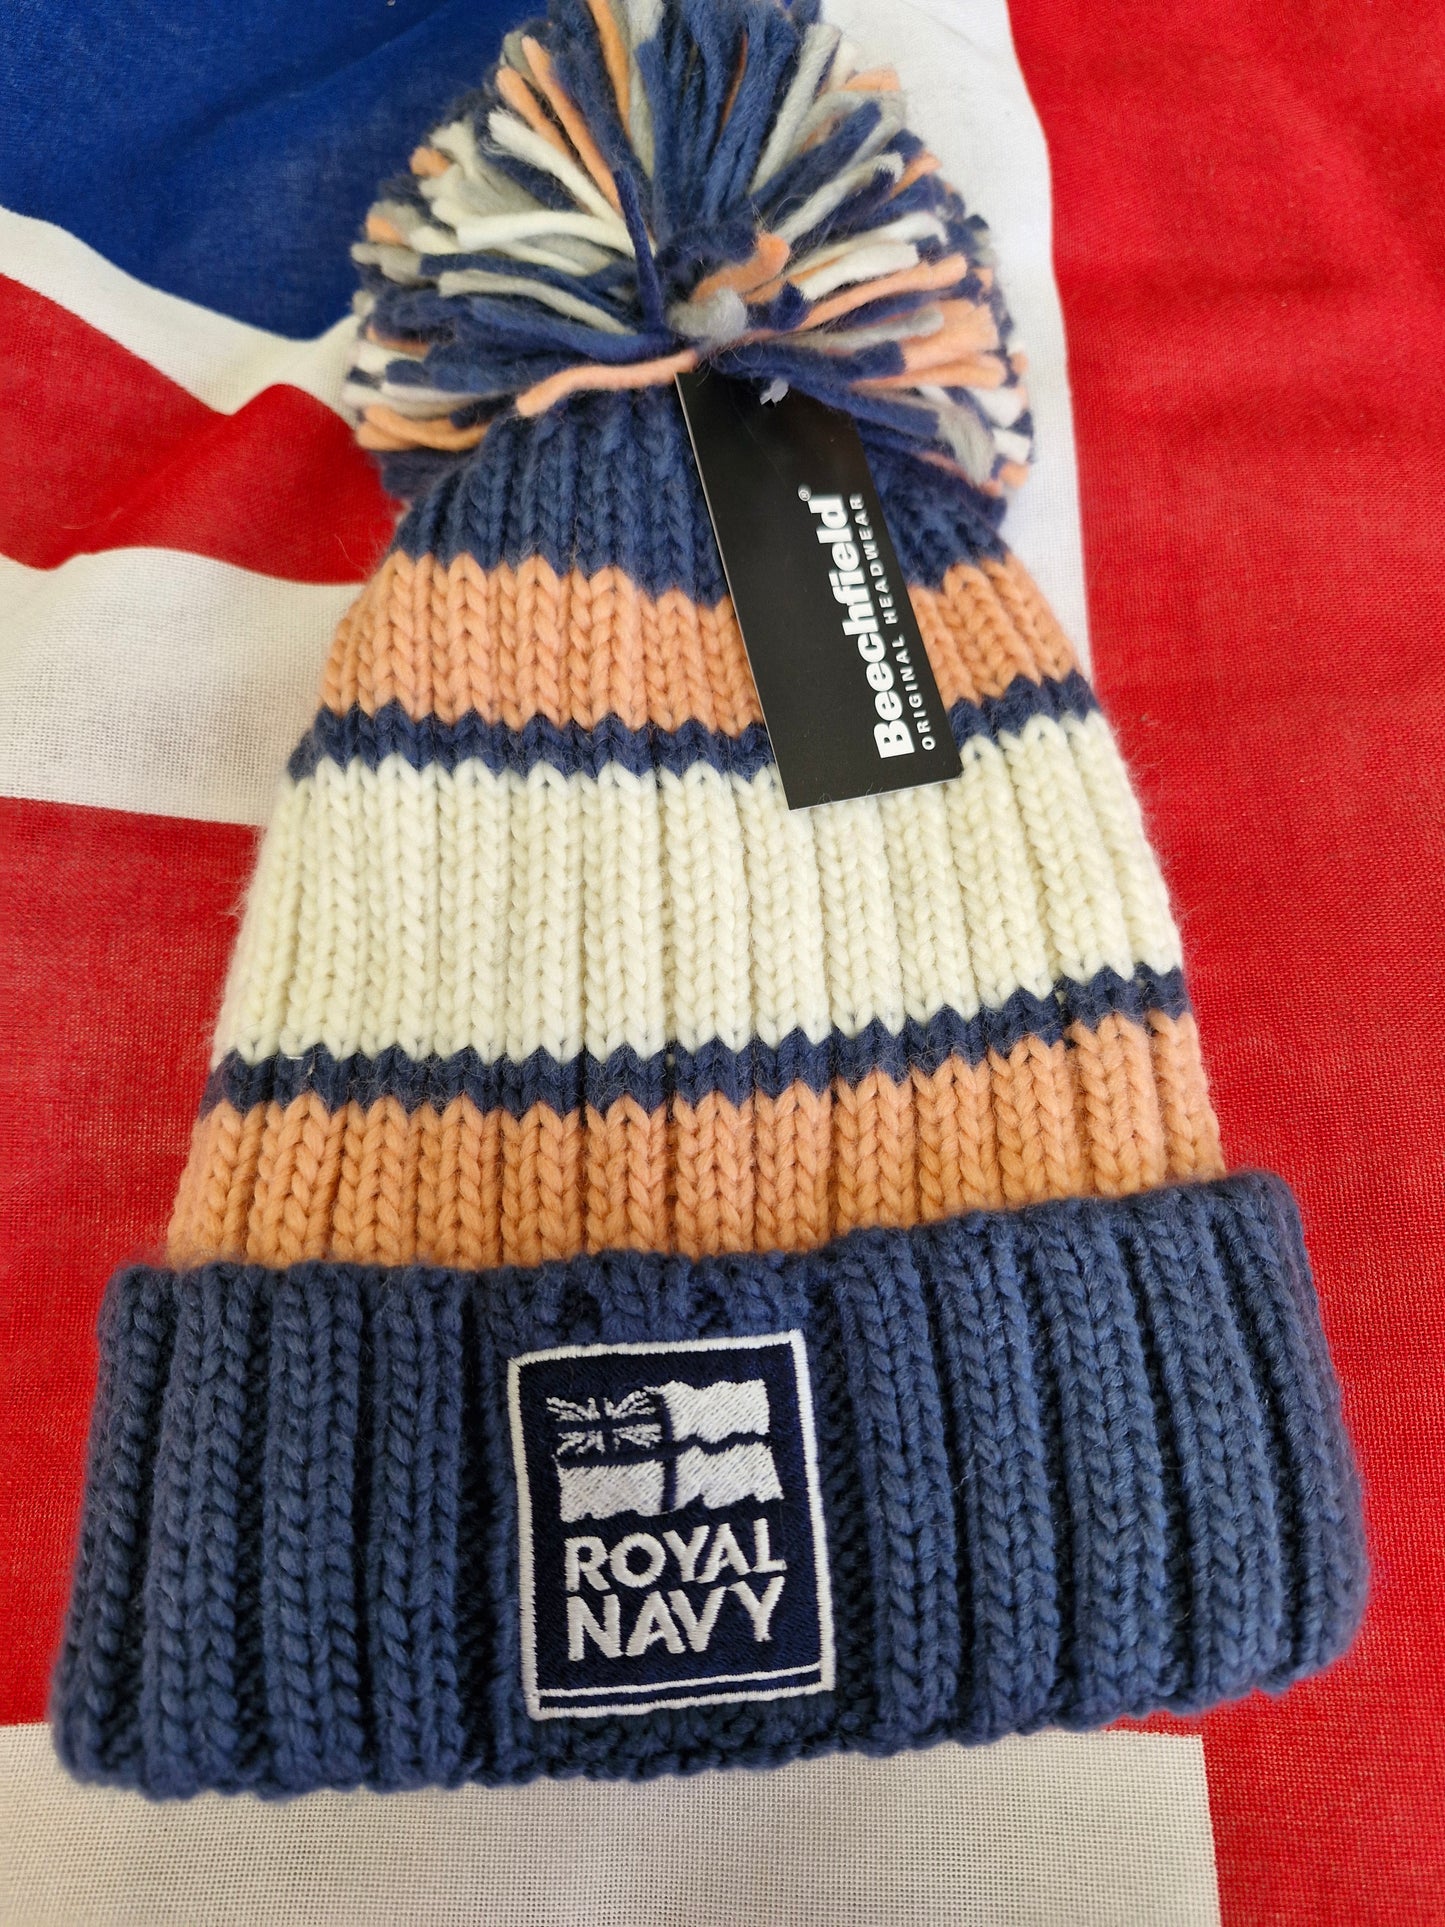 Royal Navy knitted bobble beanie